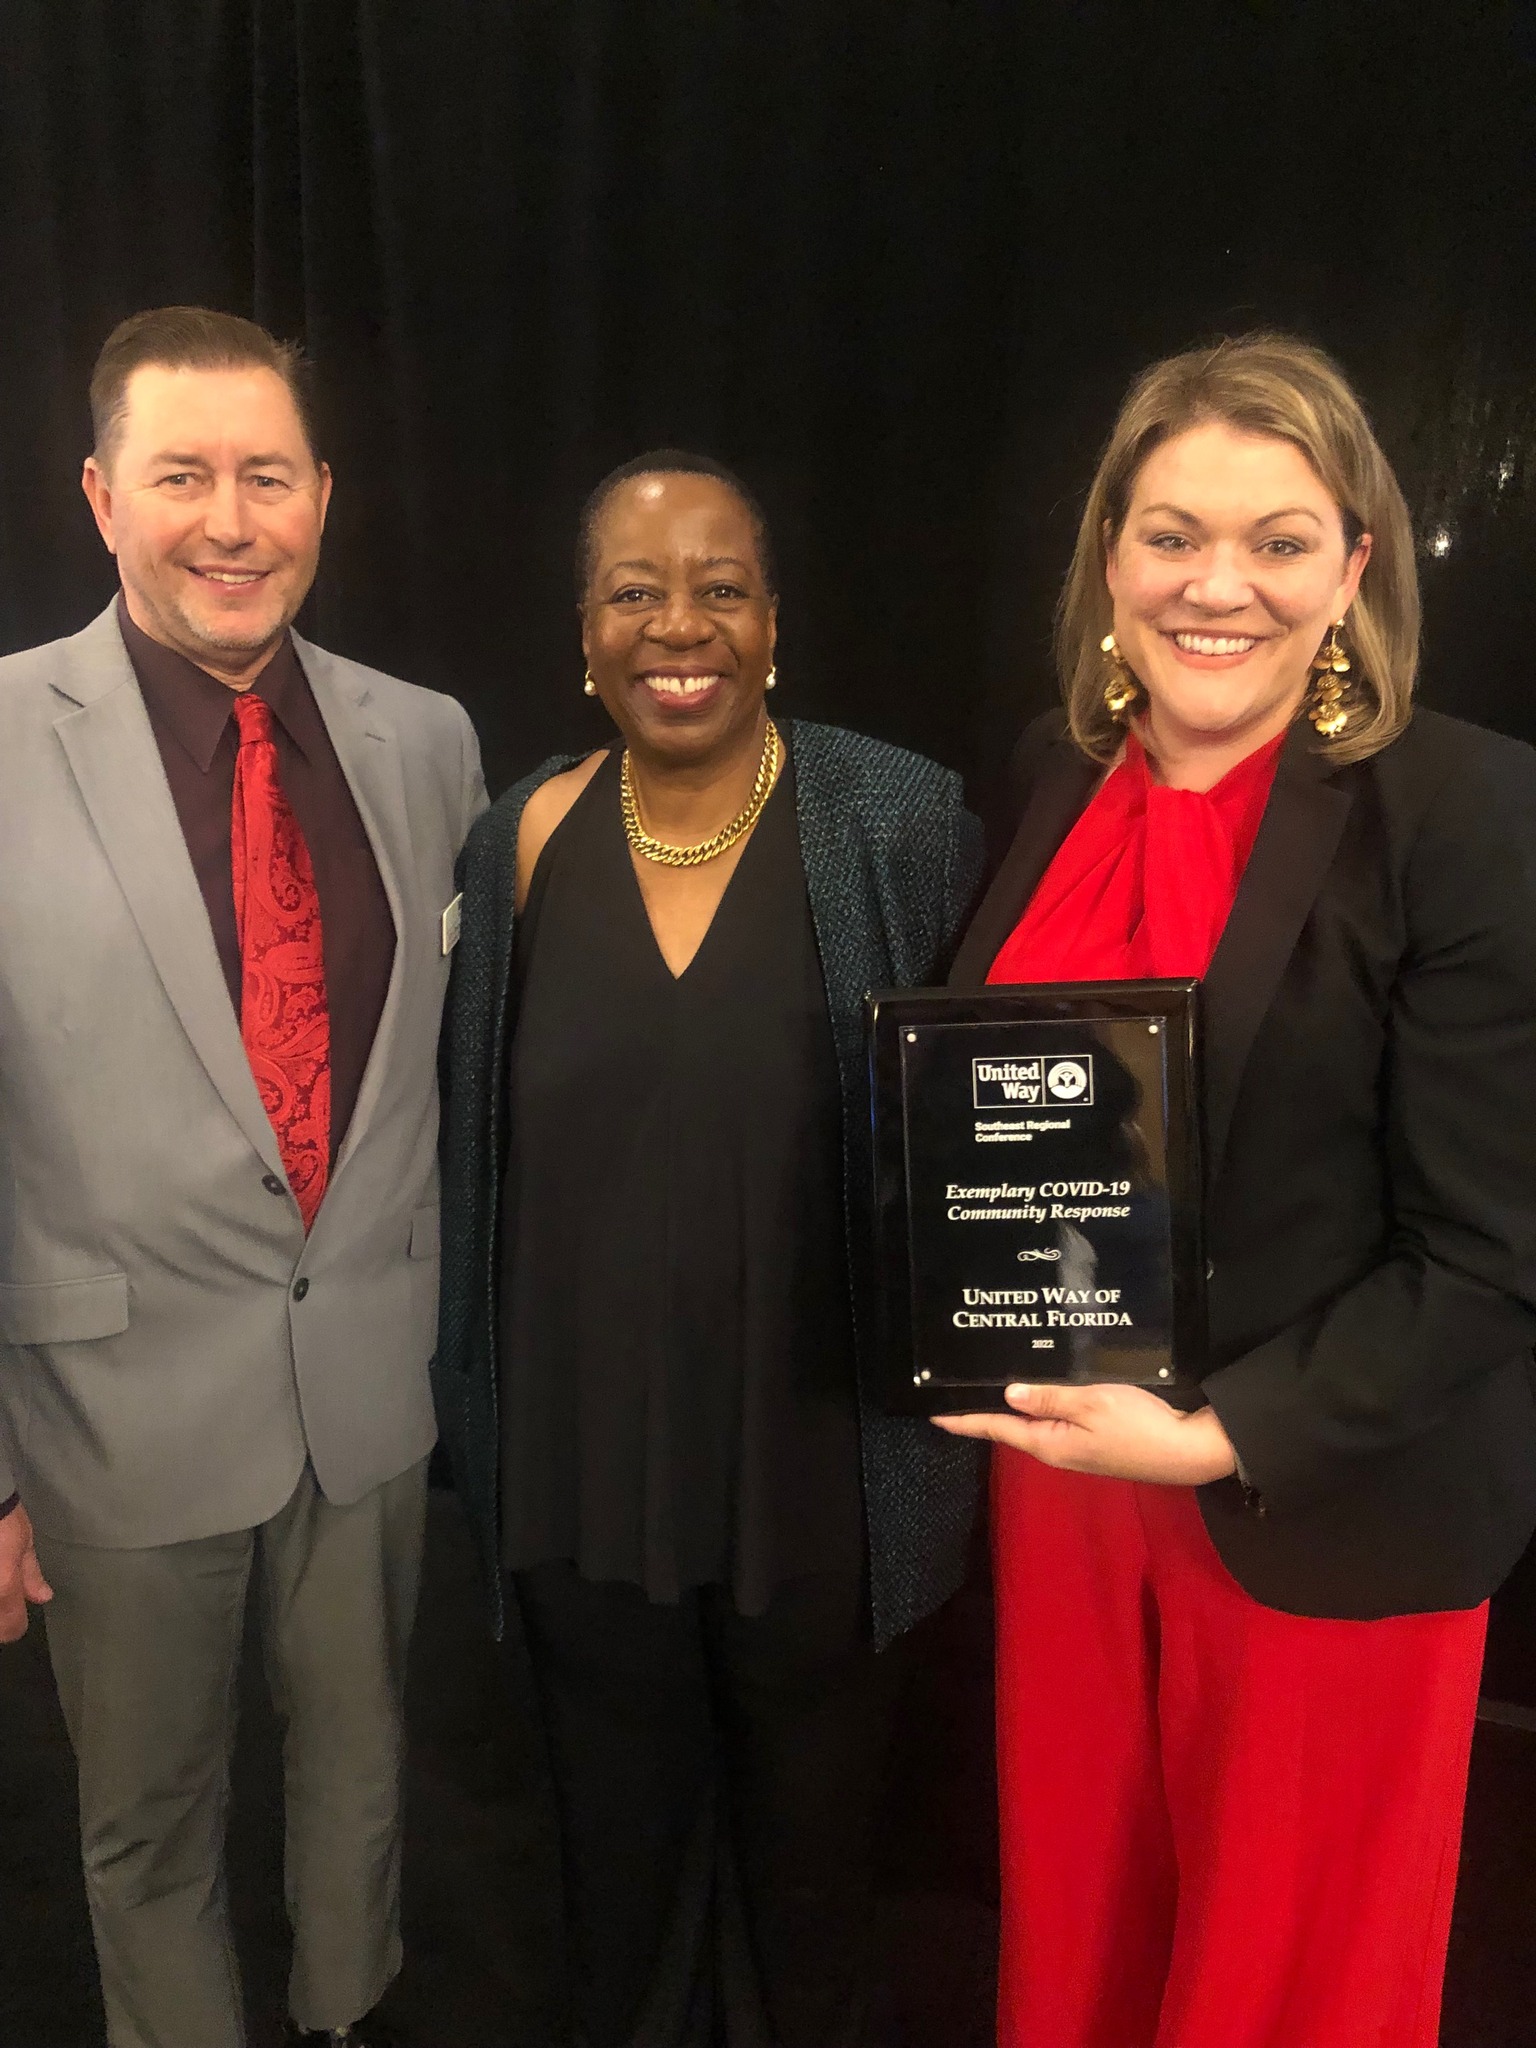 2022 SERC Awards - Angela Williams, UWW Pres. & CEO, presenting United Way of Central Florida, represented by Christina Criser Jackson (CEO) and Rod Crowley (COO), with the "Exemplary COVID-19 Community Response" award (April 2022)